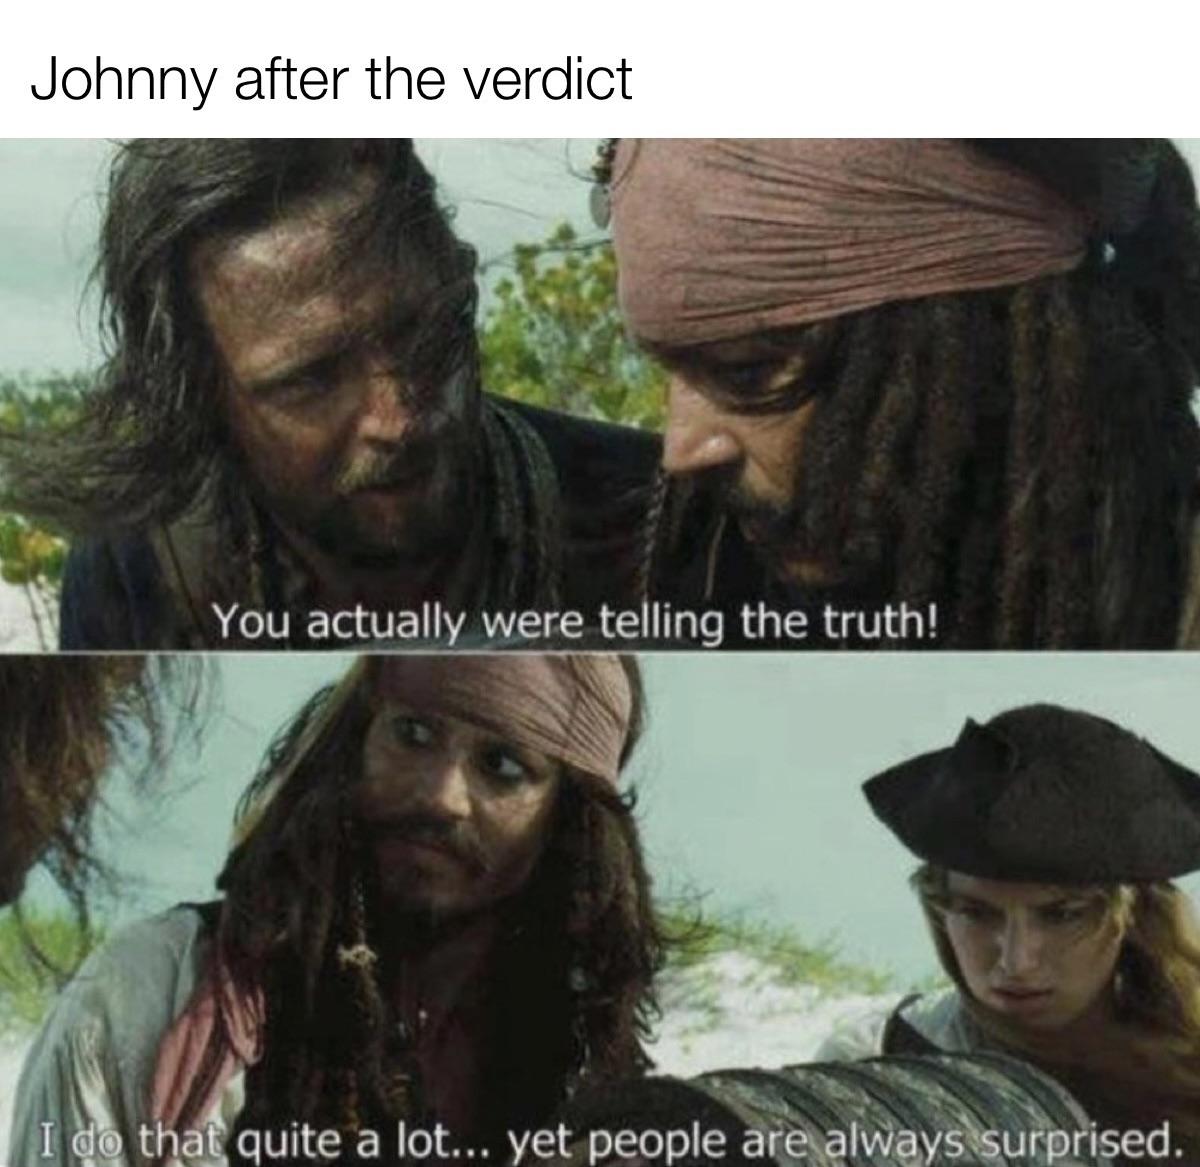 dank memes - pirates of the caribbean truth meme - Johnny after the verdict You actually were telling the truth! I do that quite a lot... yet people are always surprised.